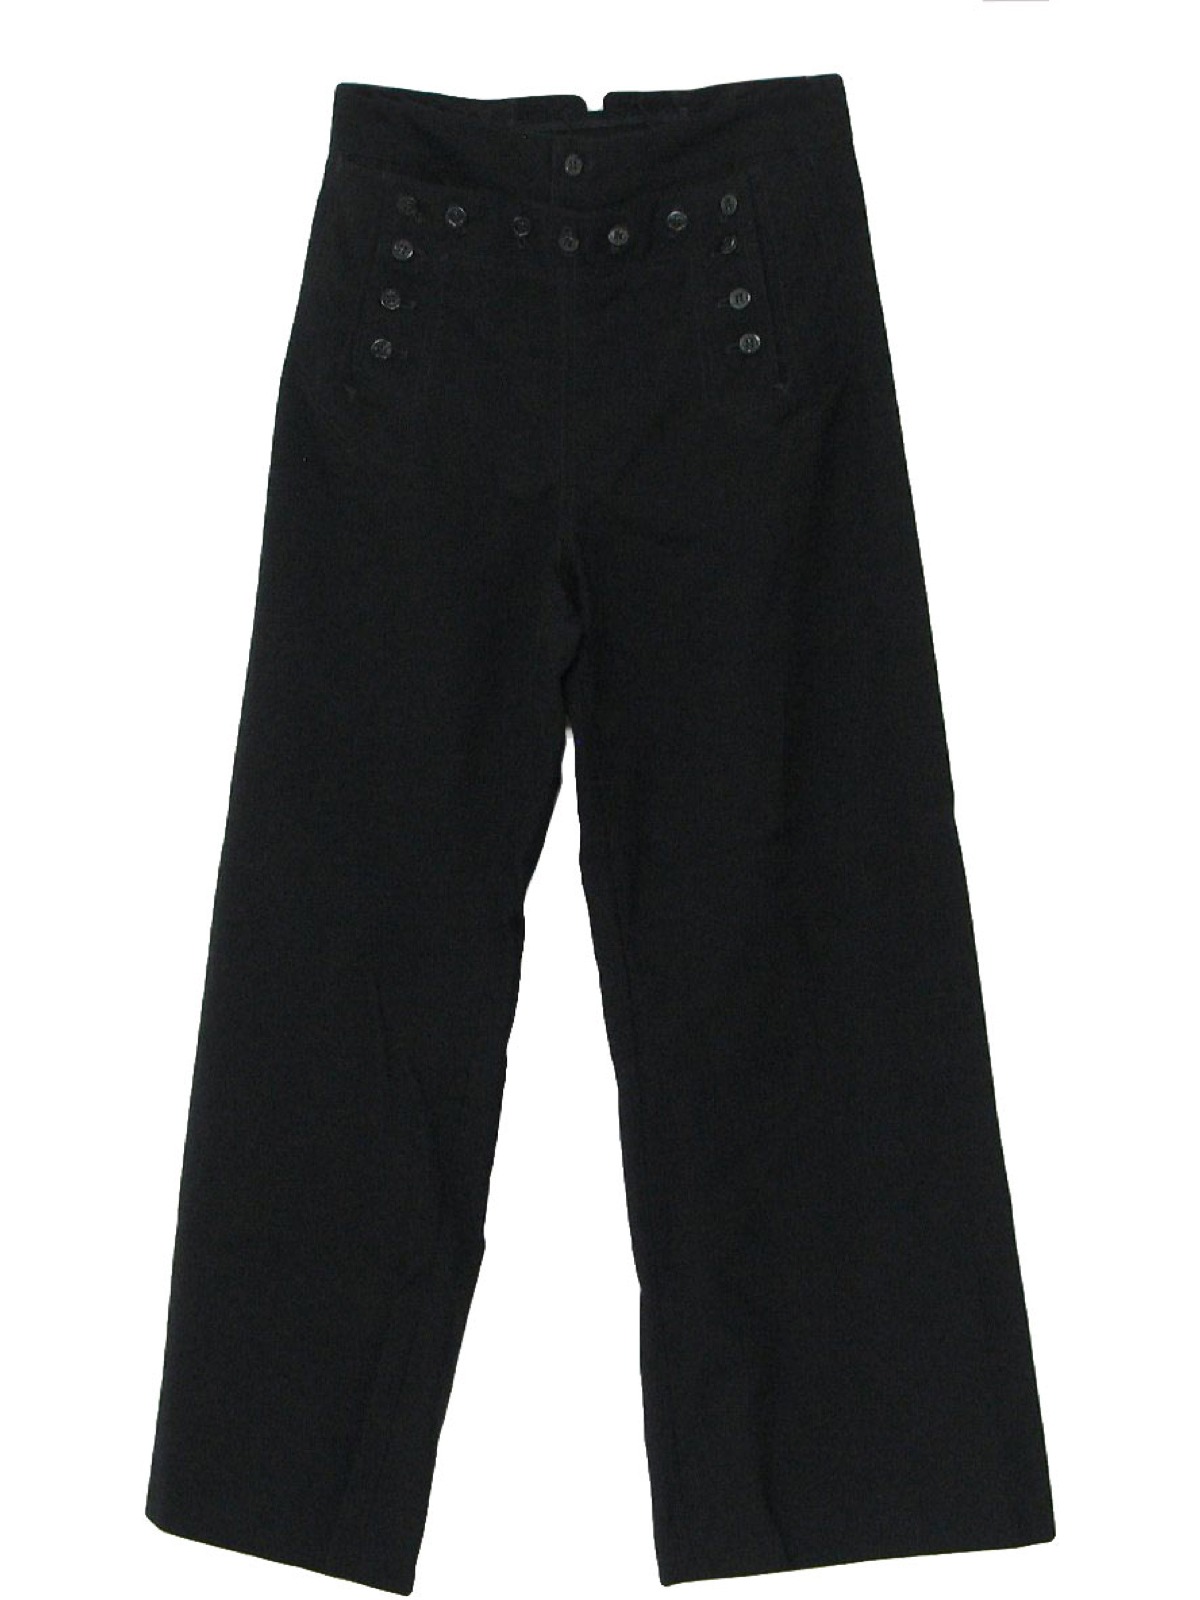 Sixties Navy Issue Bellbottom Pants: 60s -Navy Issue- Mens midnight ...